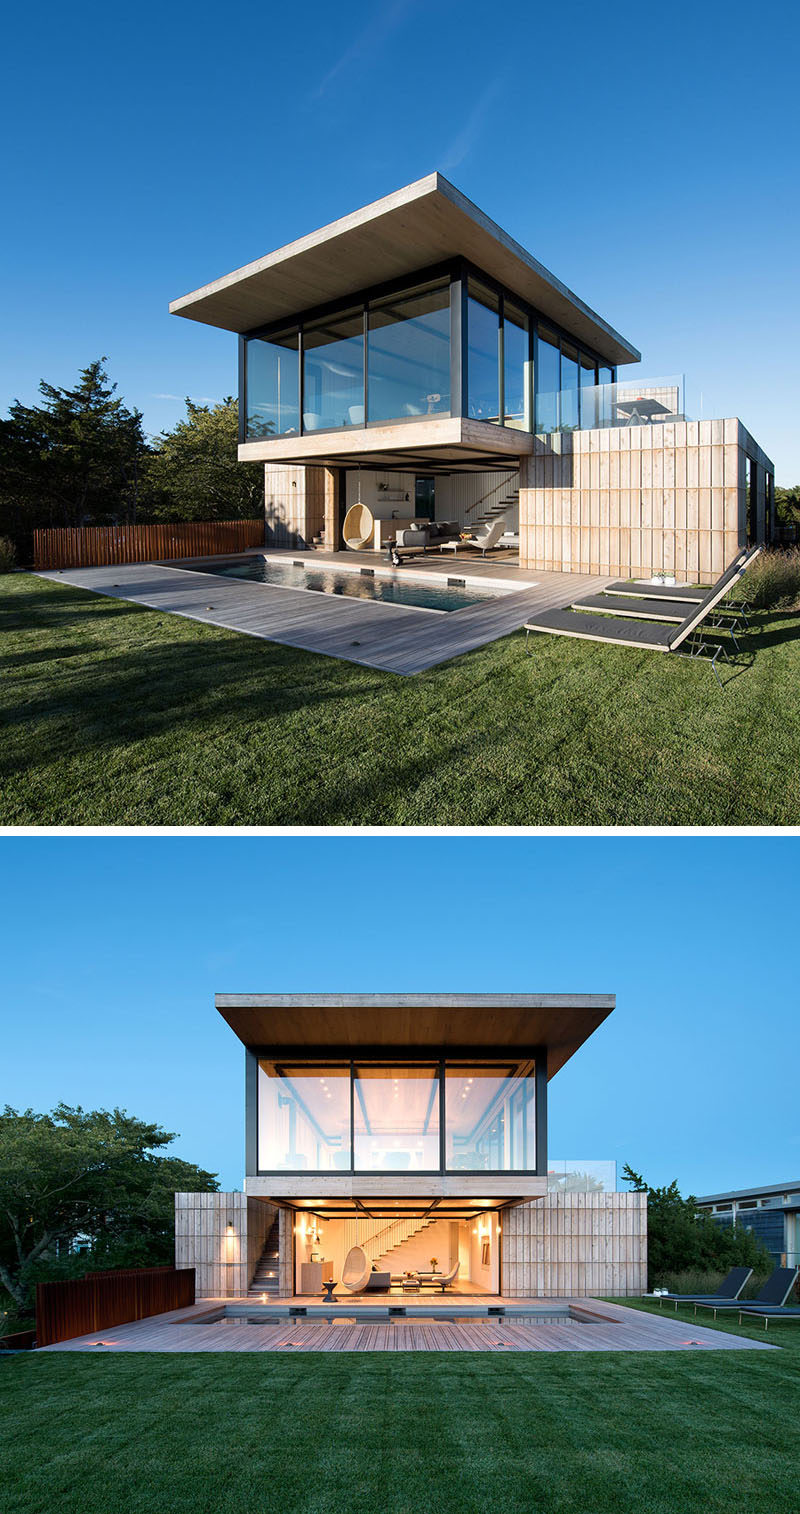 The steel structure of this home allows the upper living level to cantilever out and provides shade to the lower level.